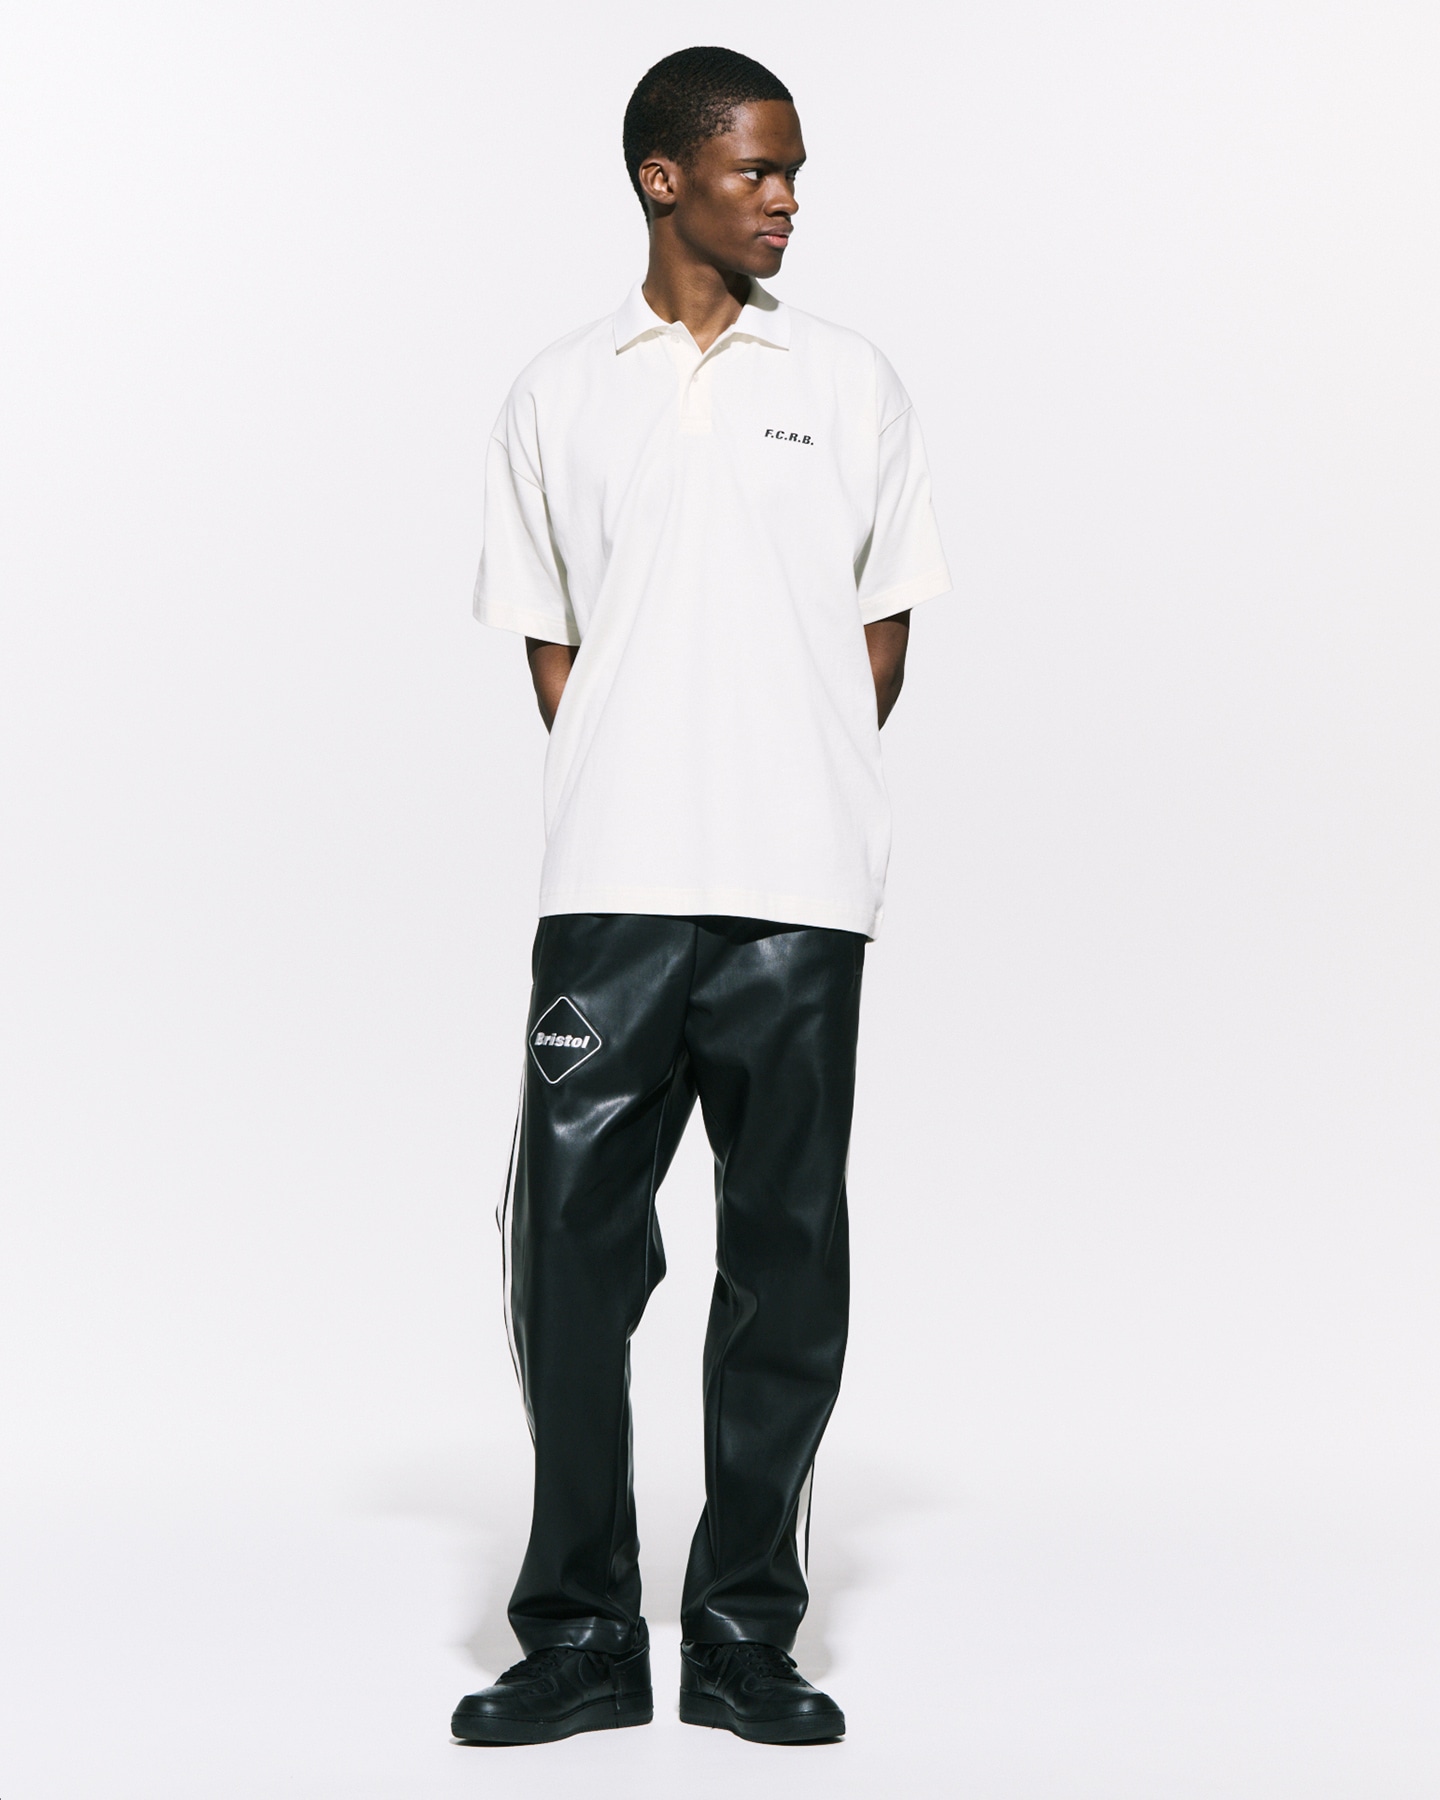 SOPH. | SYNTHETIC LEATHER PANTS(L BLACK):